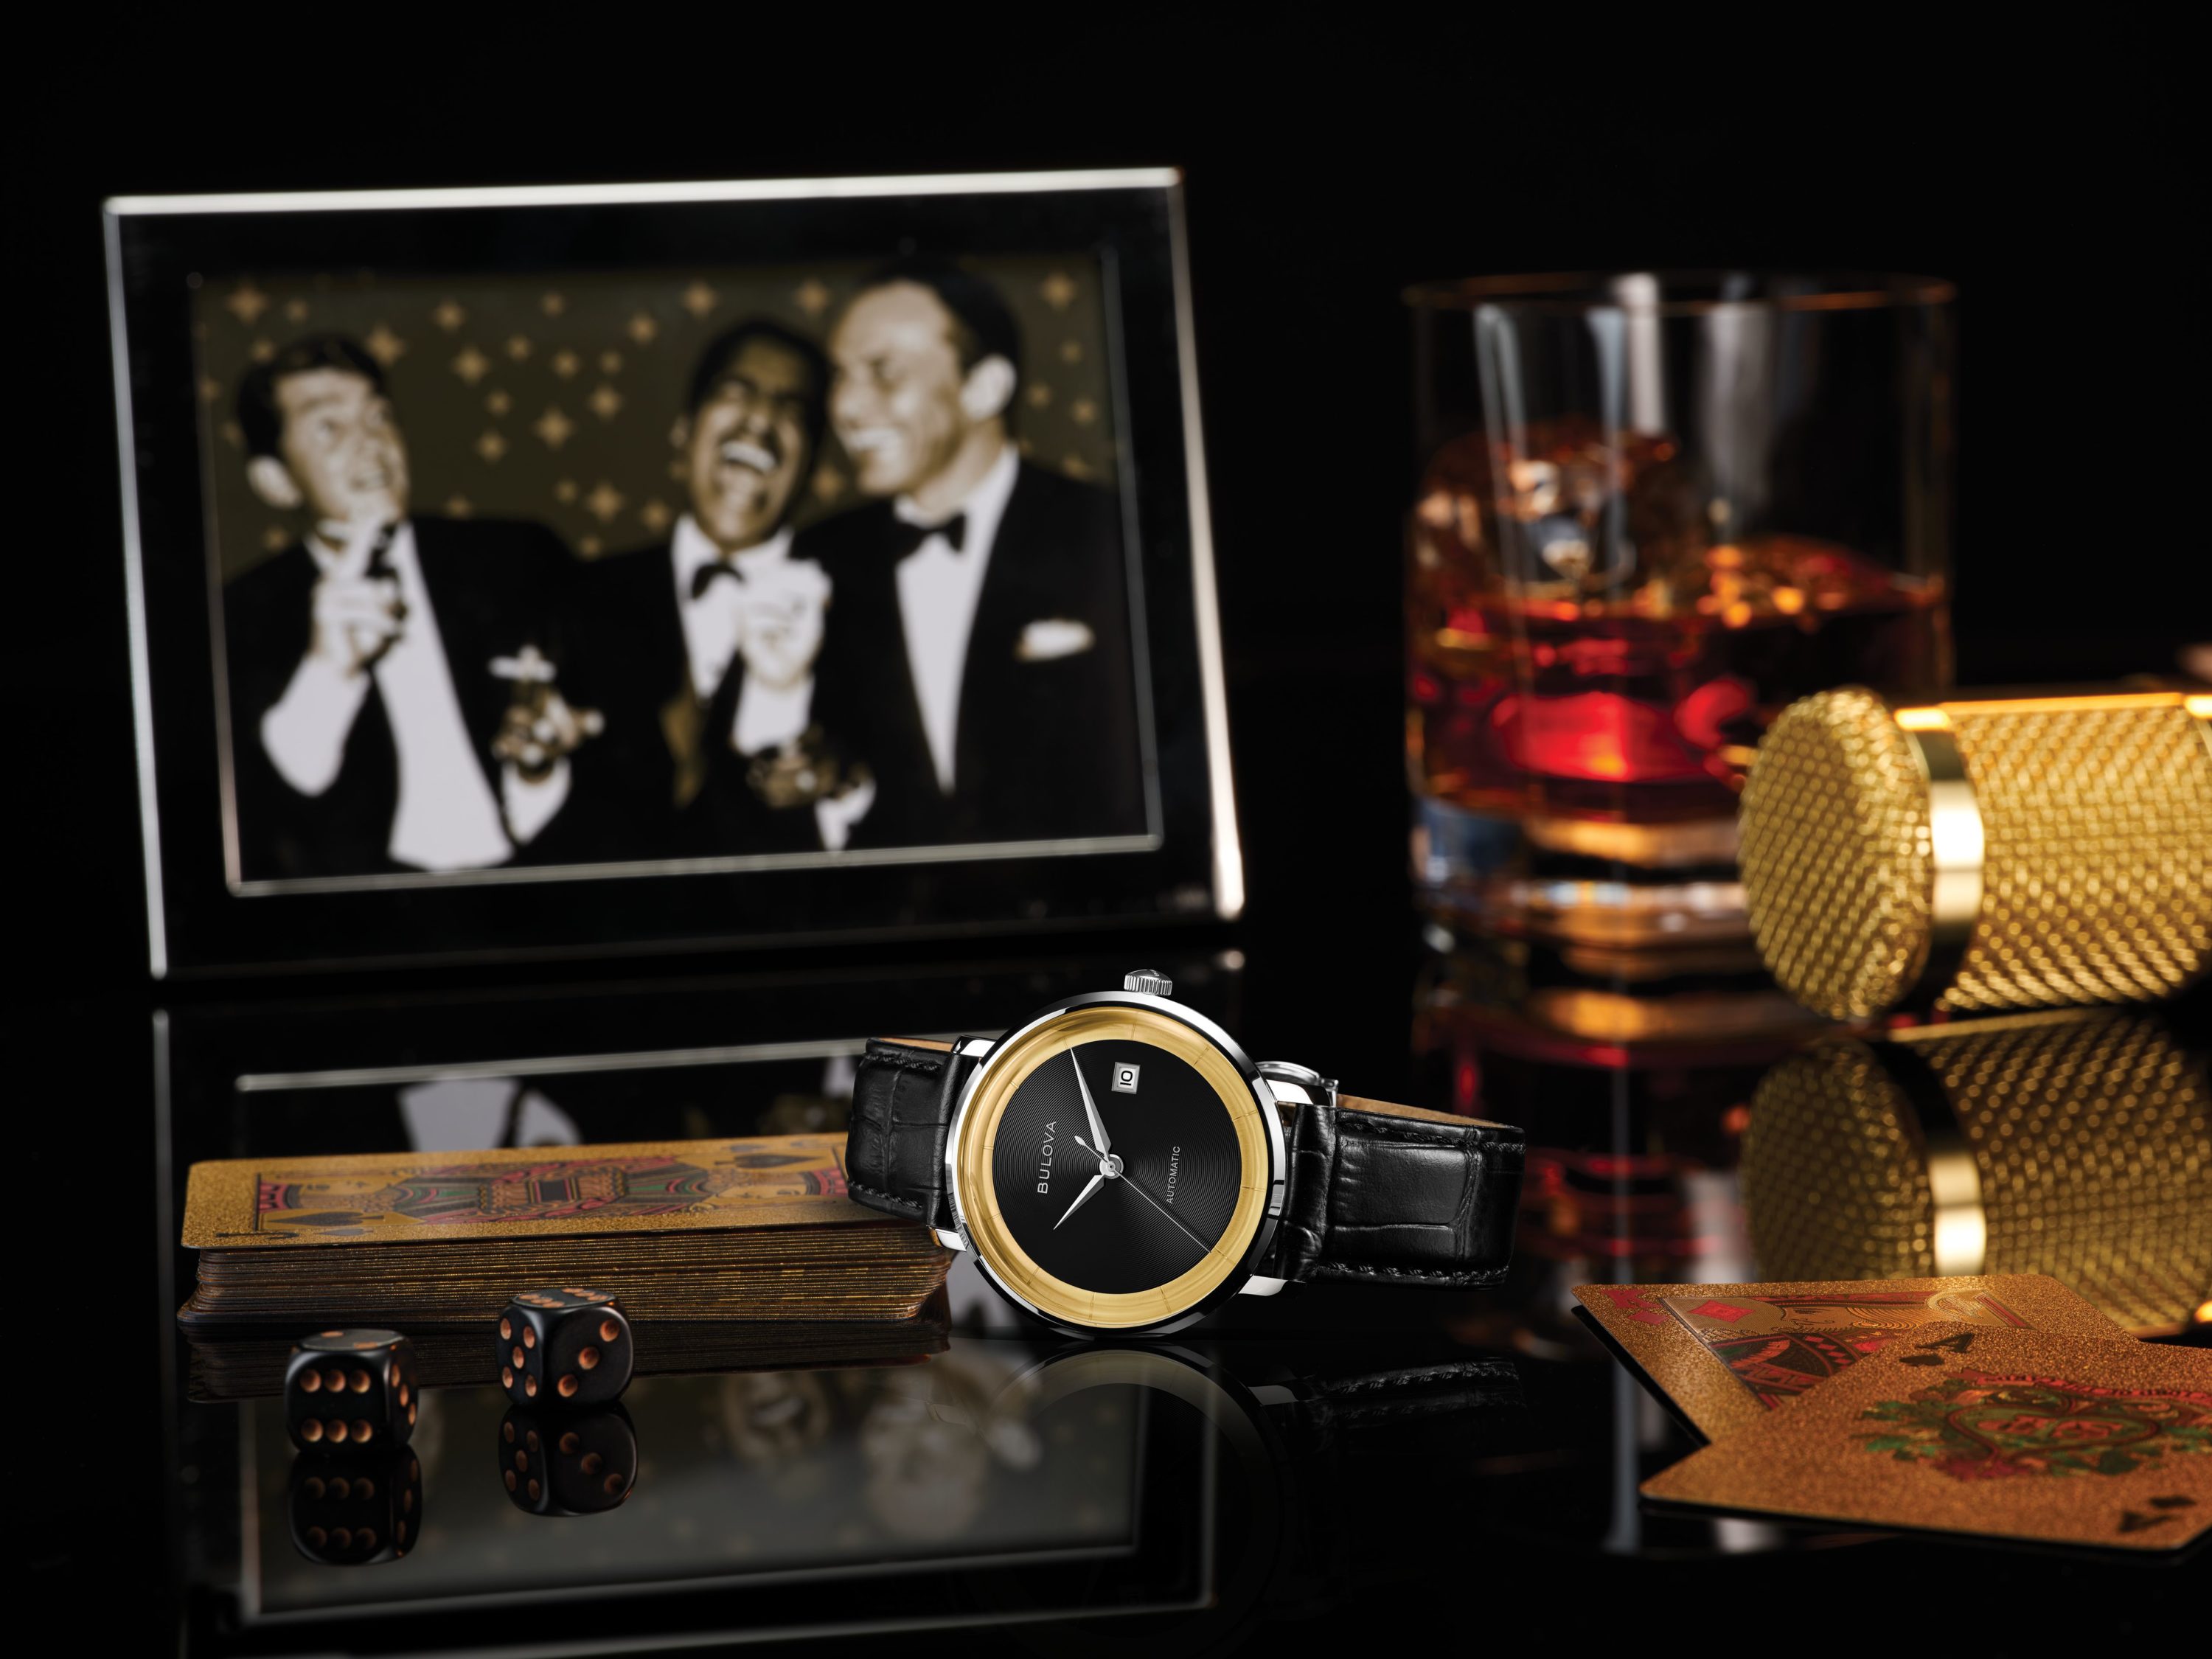 Sponsored: The New Rat Pack Timepiece Joins Bulova?s Frank Sinatra Collection